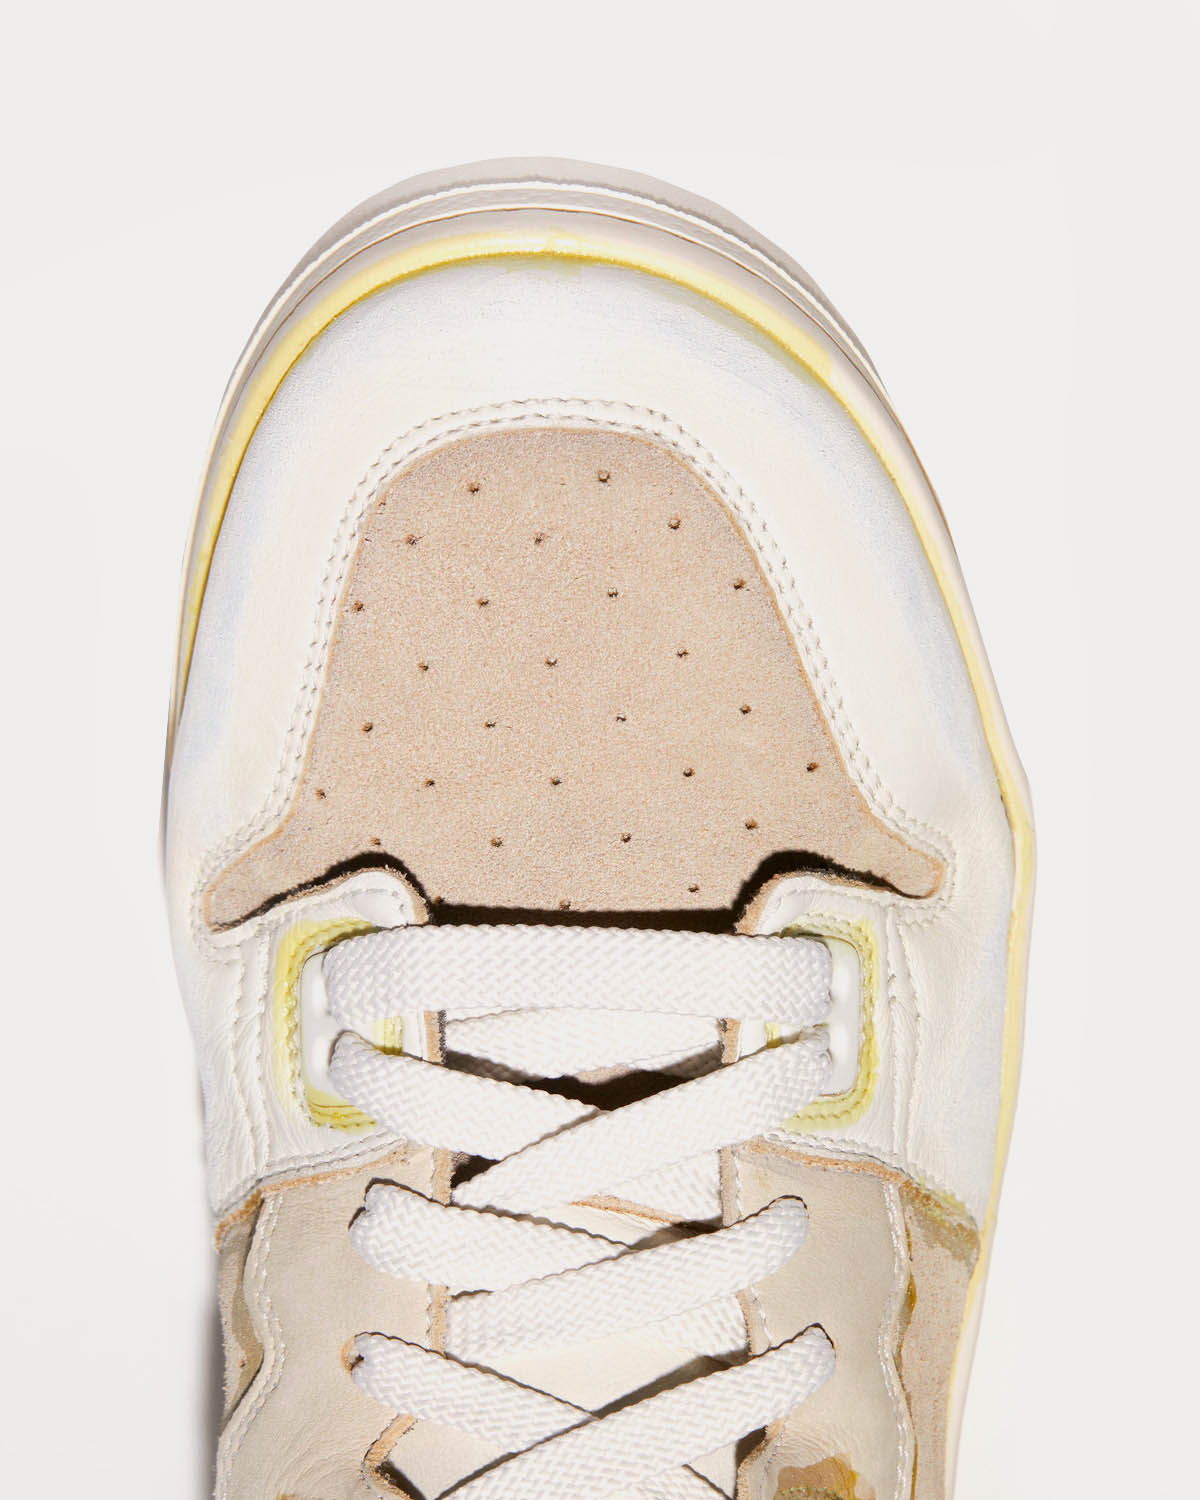 Acne Studios - Destroyed Leather White / Off-White High Top Sneakers